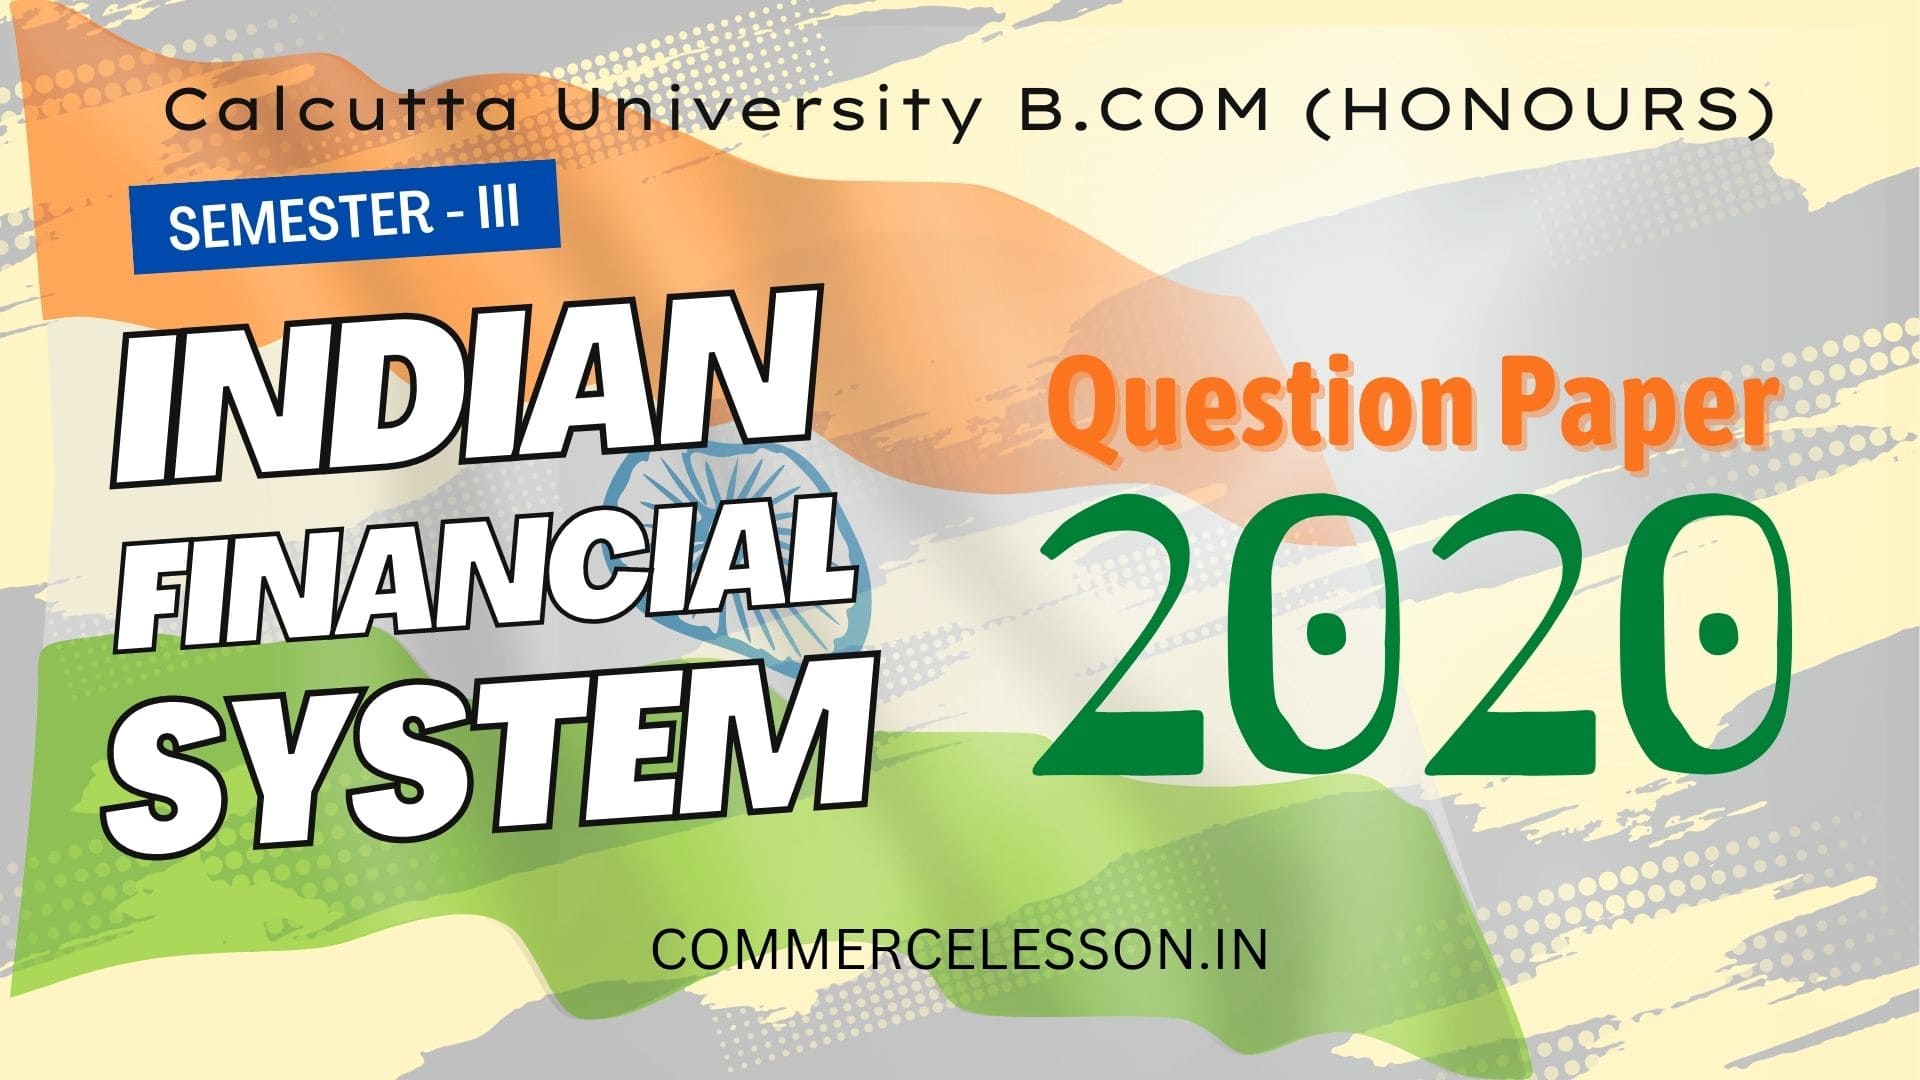 Indian Financial System Honours Question Paper 2020